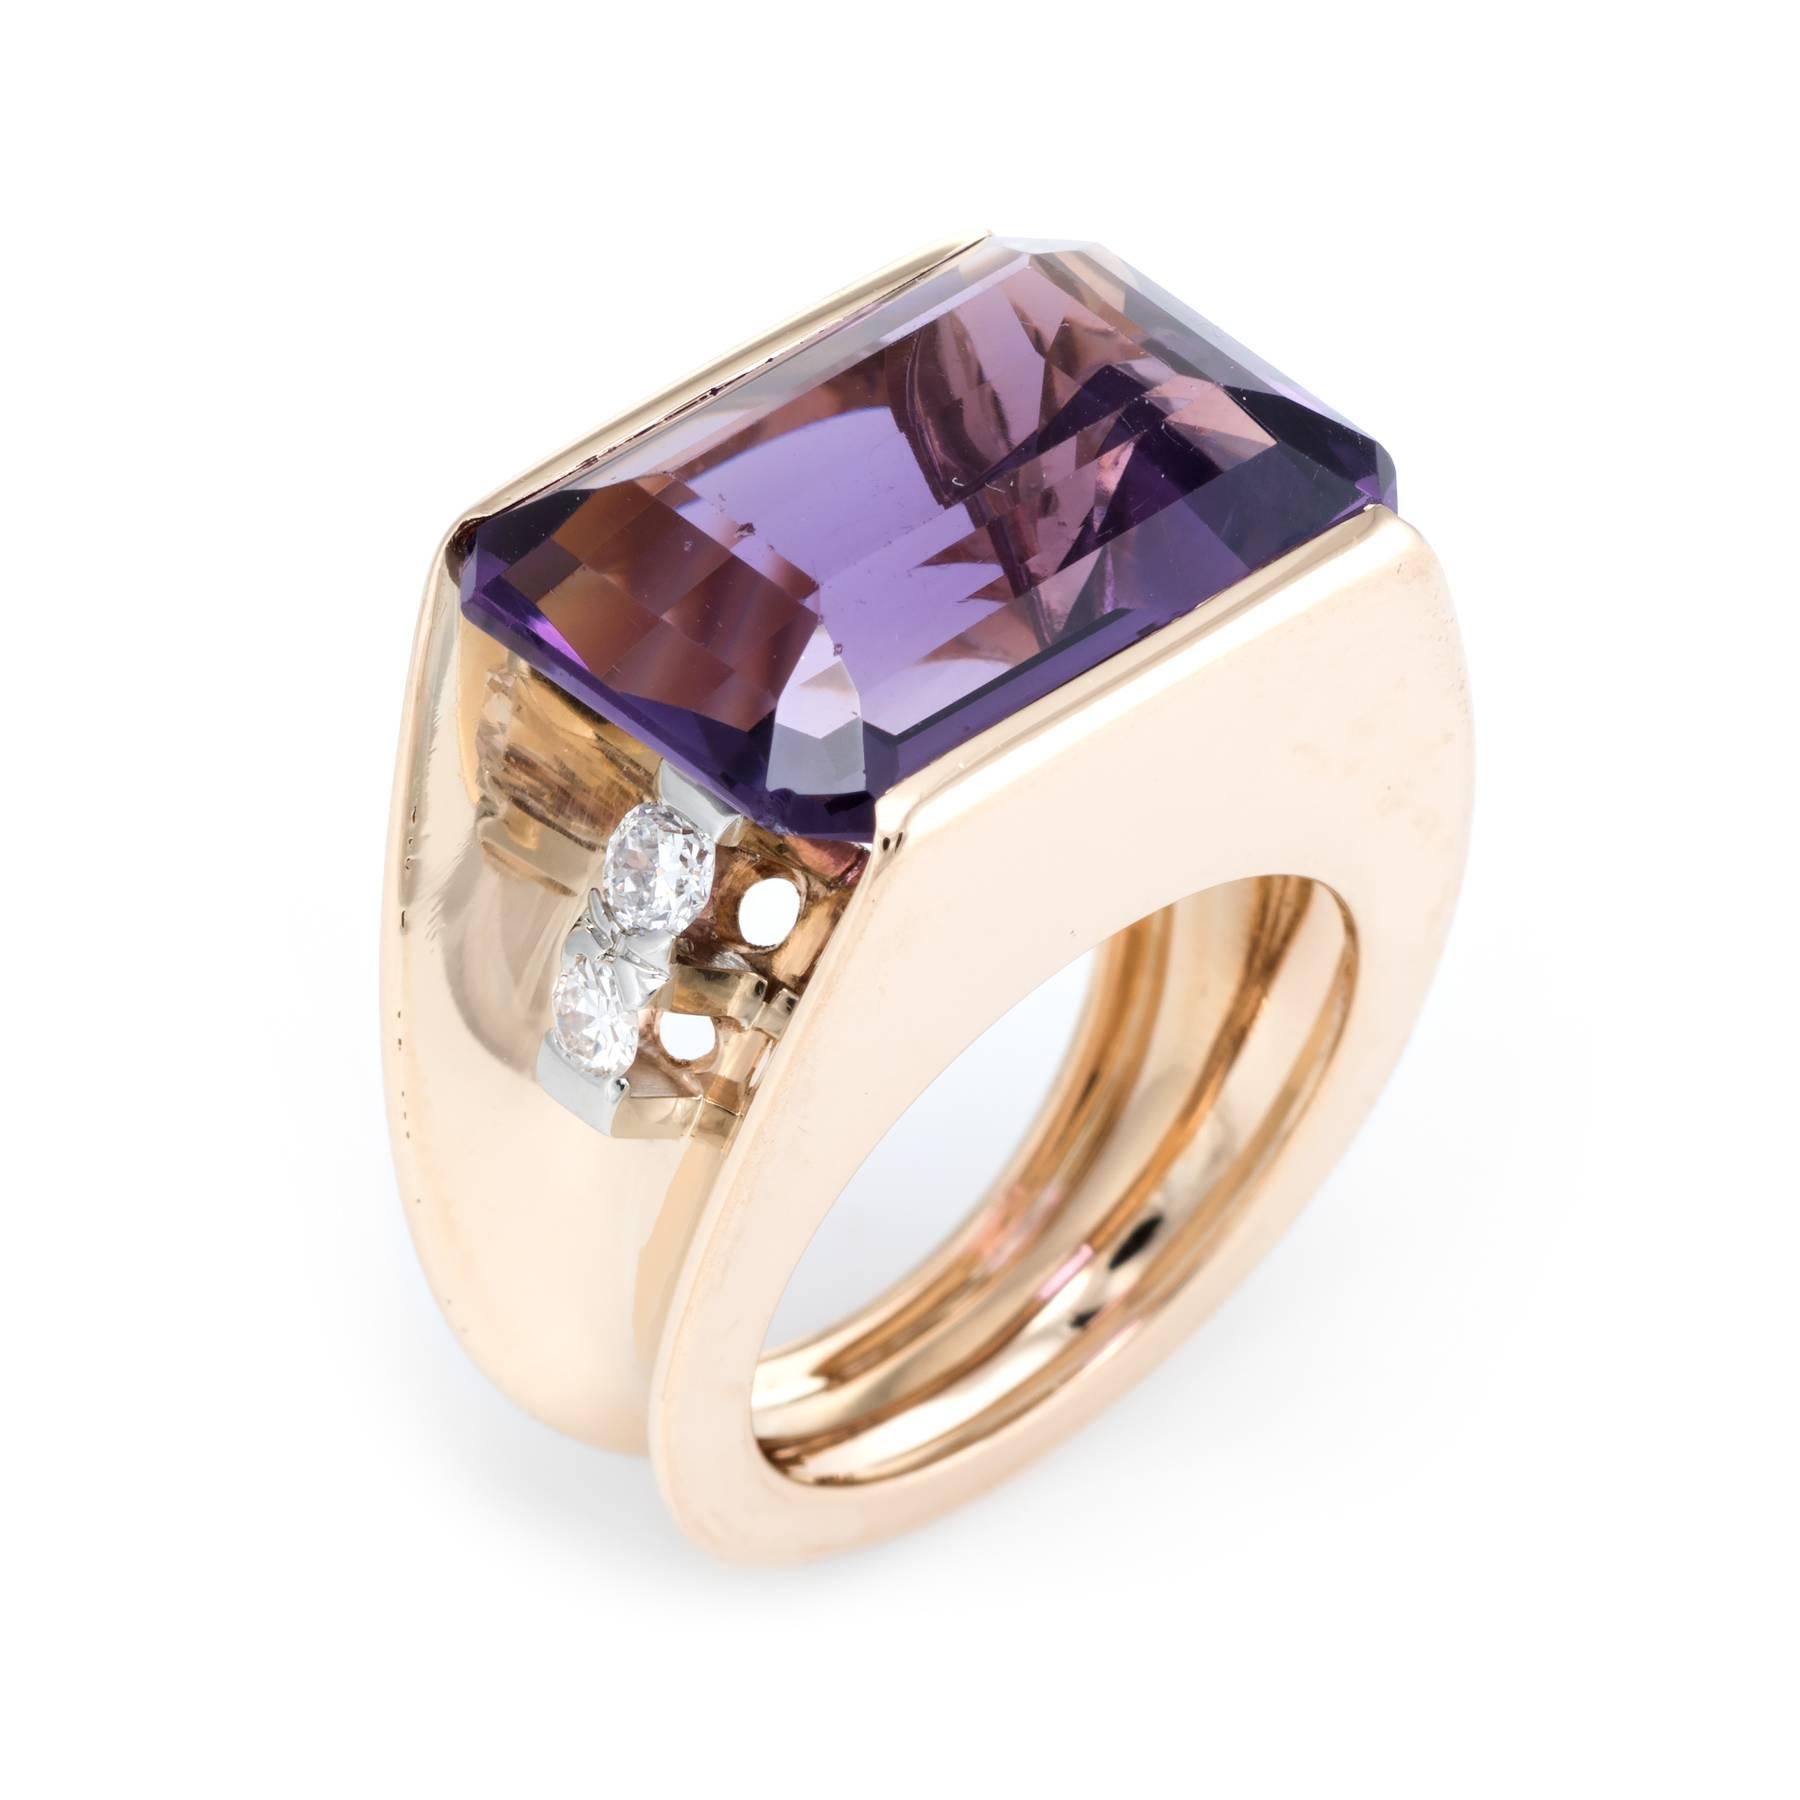 Overview:

Finely detailed vintage (circa 1960s) cocktail ring, crafted in 14 karat yellow gold. 

Emerald cut amethyst measures 18.5mm x 12mm (estimated at 15 carats), accented with an estimated 0.40 carats of diamonds (estimated at H-I color and